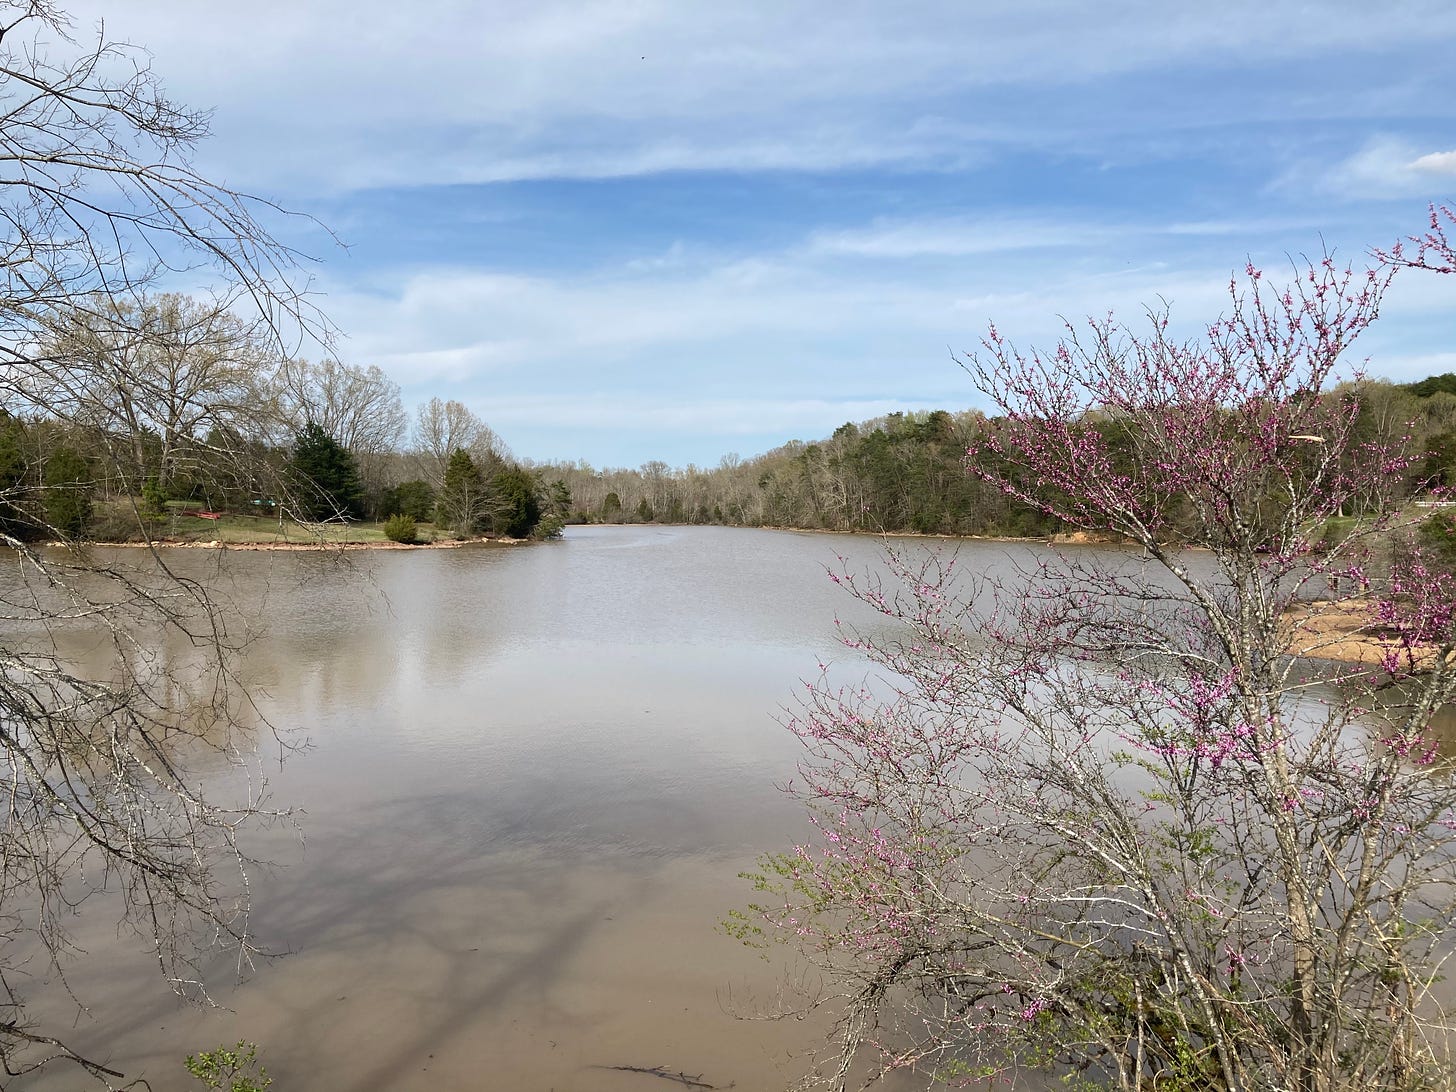 redbuds starting to bloom over a muddy river